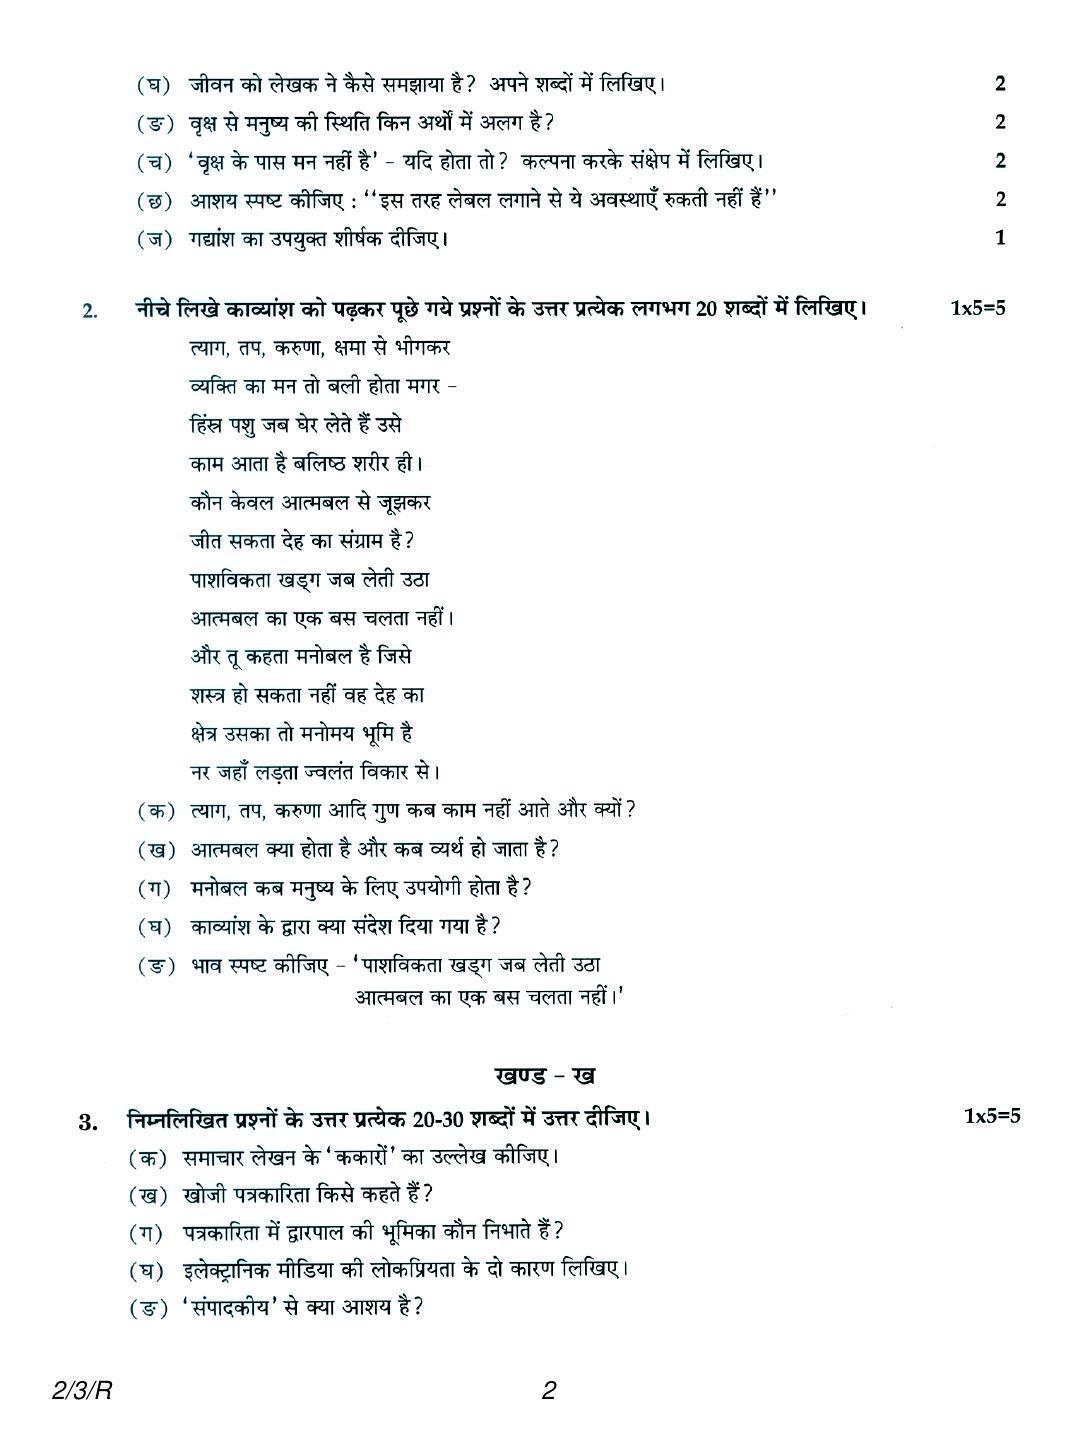 CBSE Class 12 2-3R HINDI CORE (SGN) 2018 Question Paper - Page 2